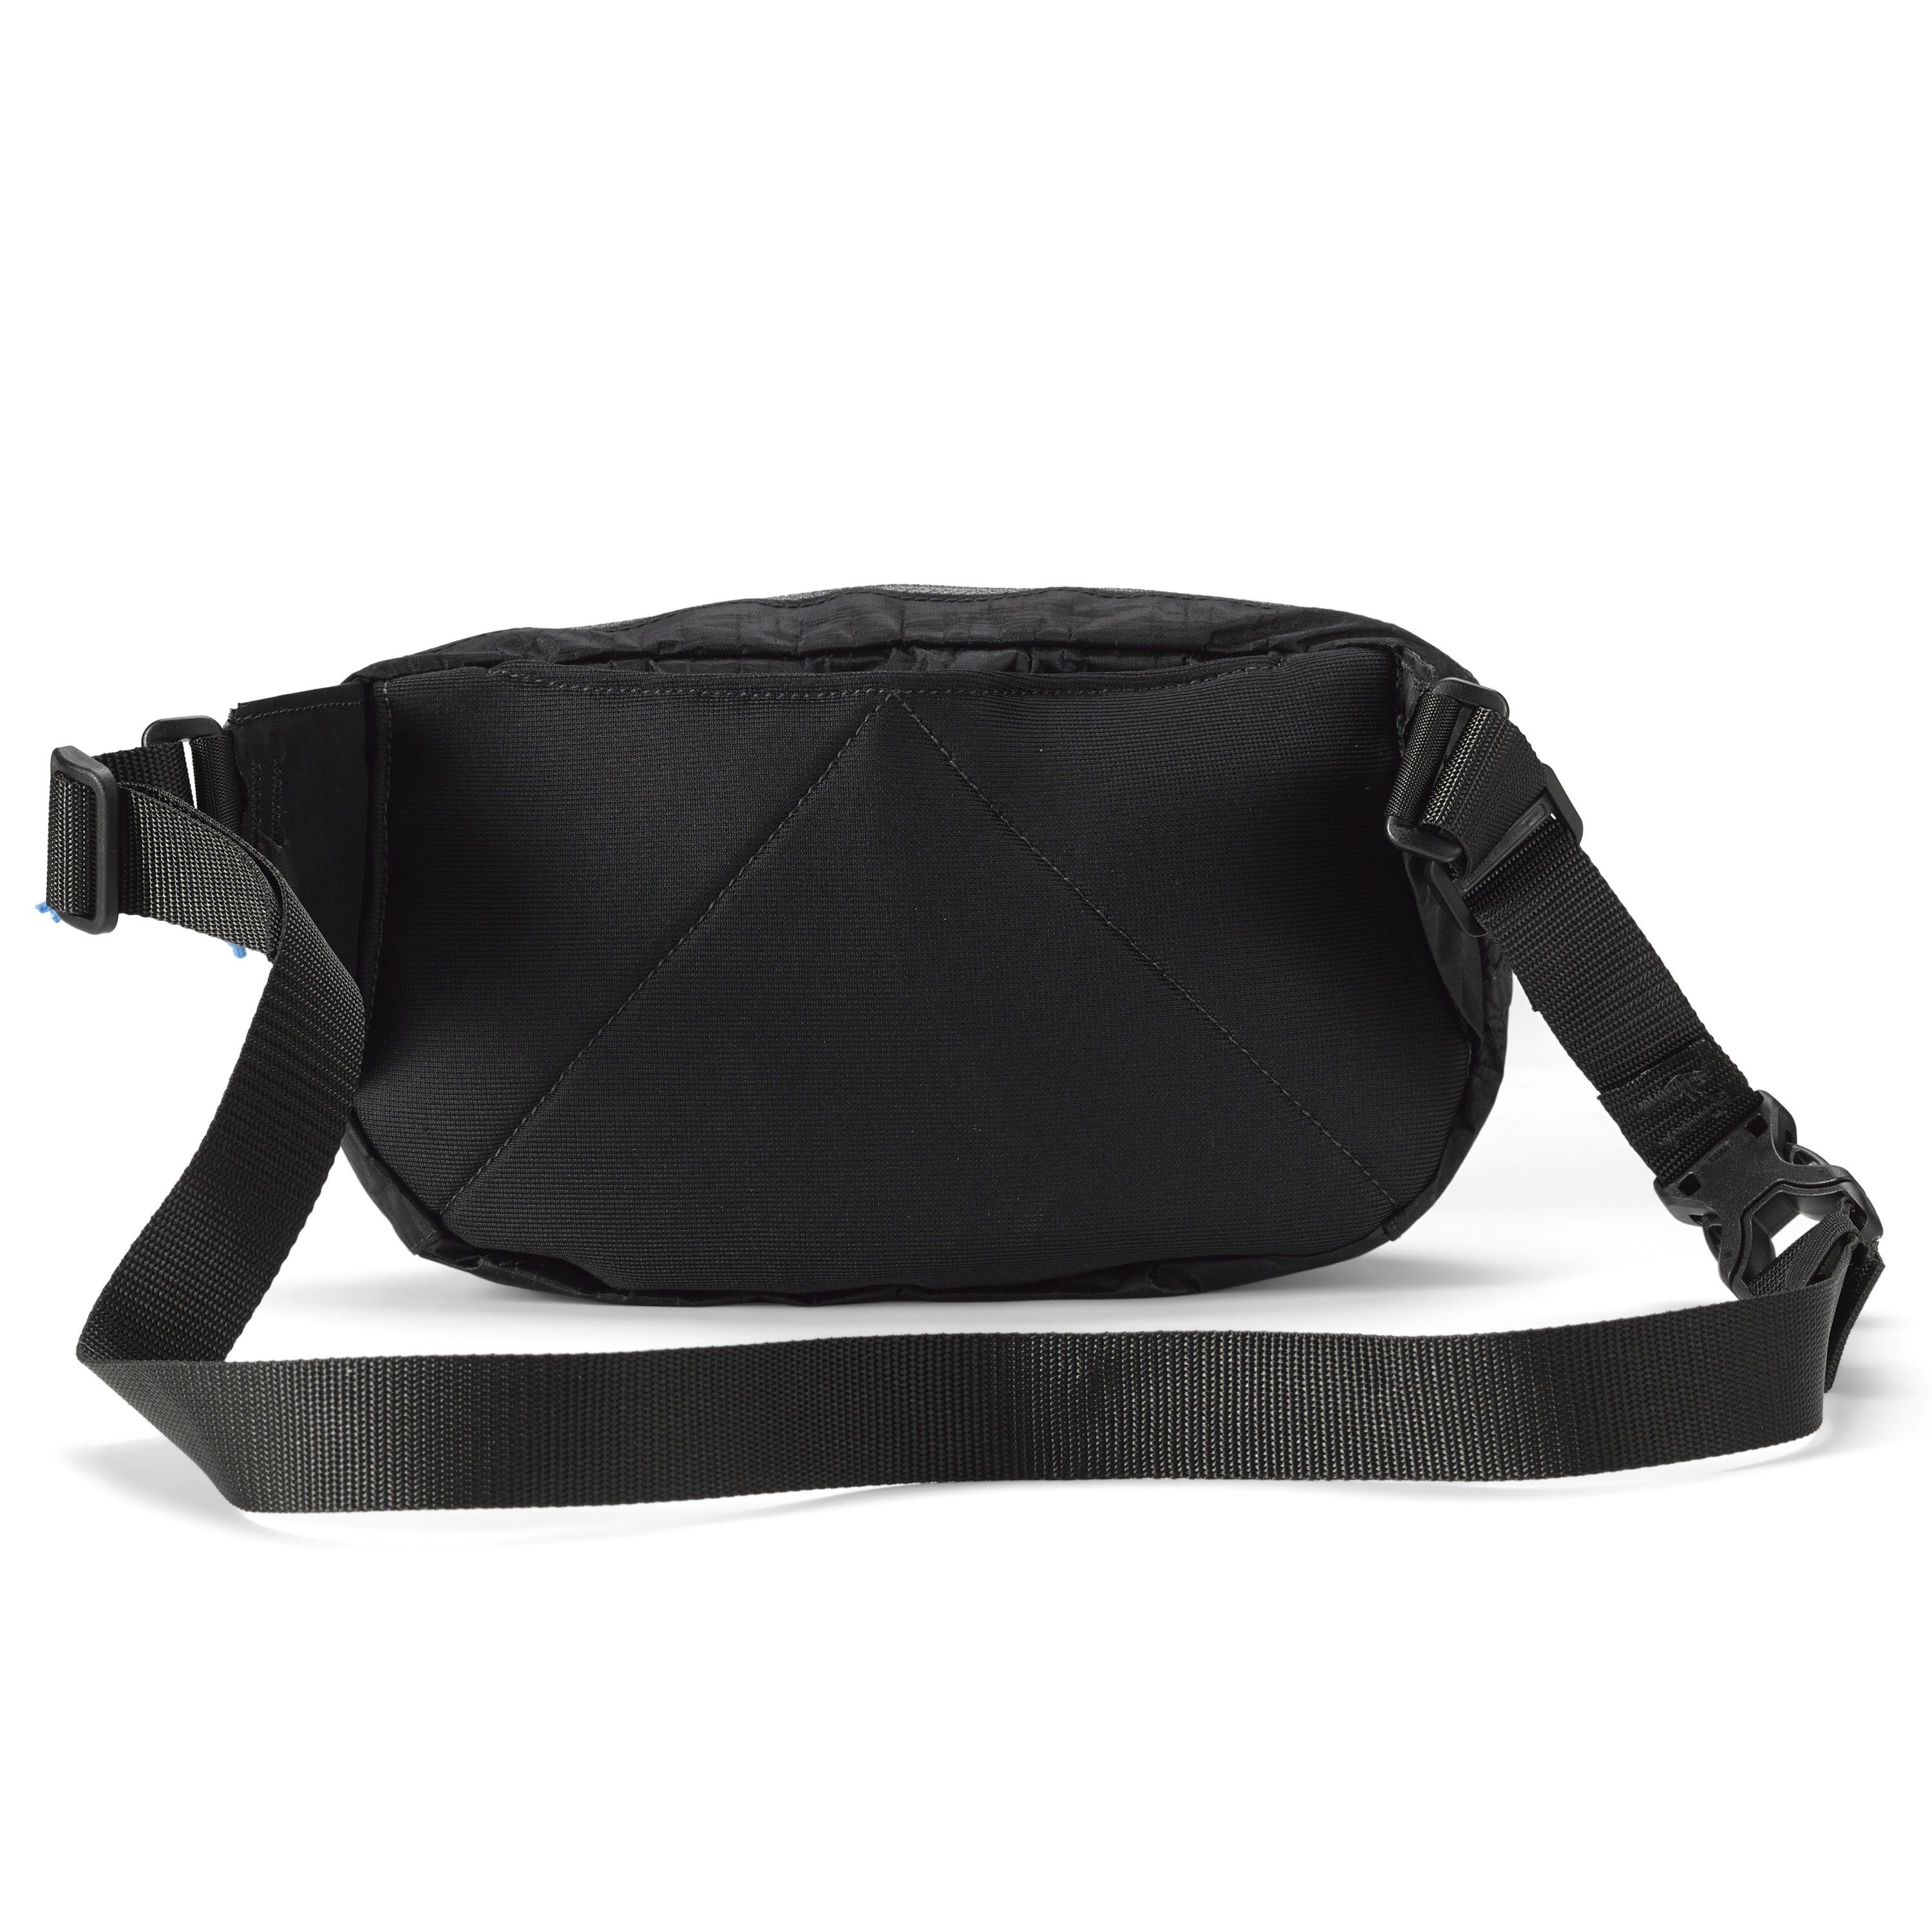 Versa Ultralight Fanny Pack and Pack Accessory | Hyperlite